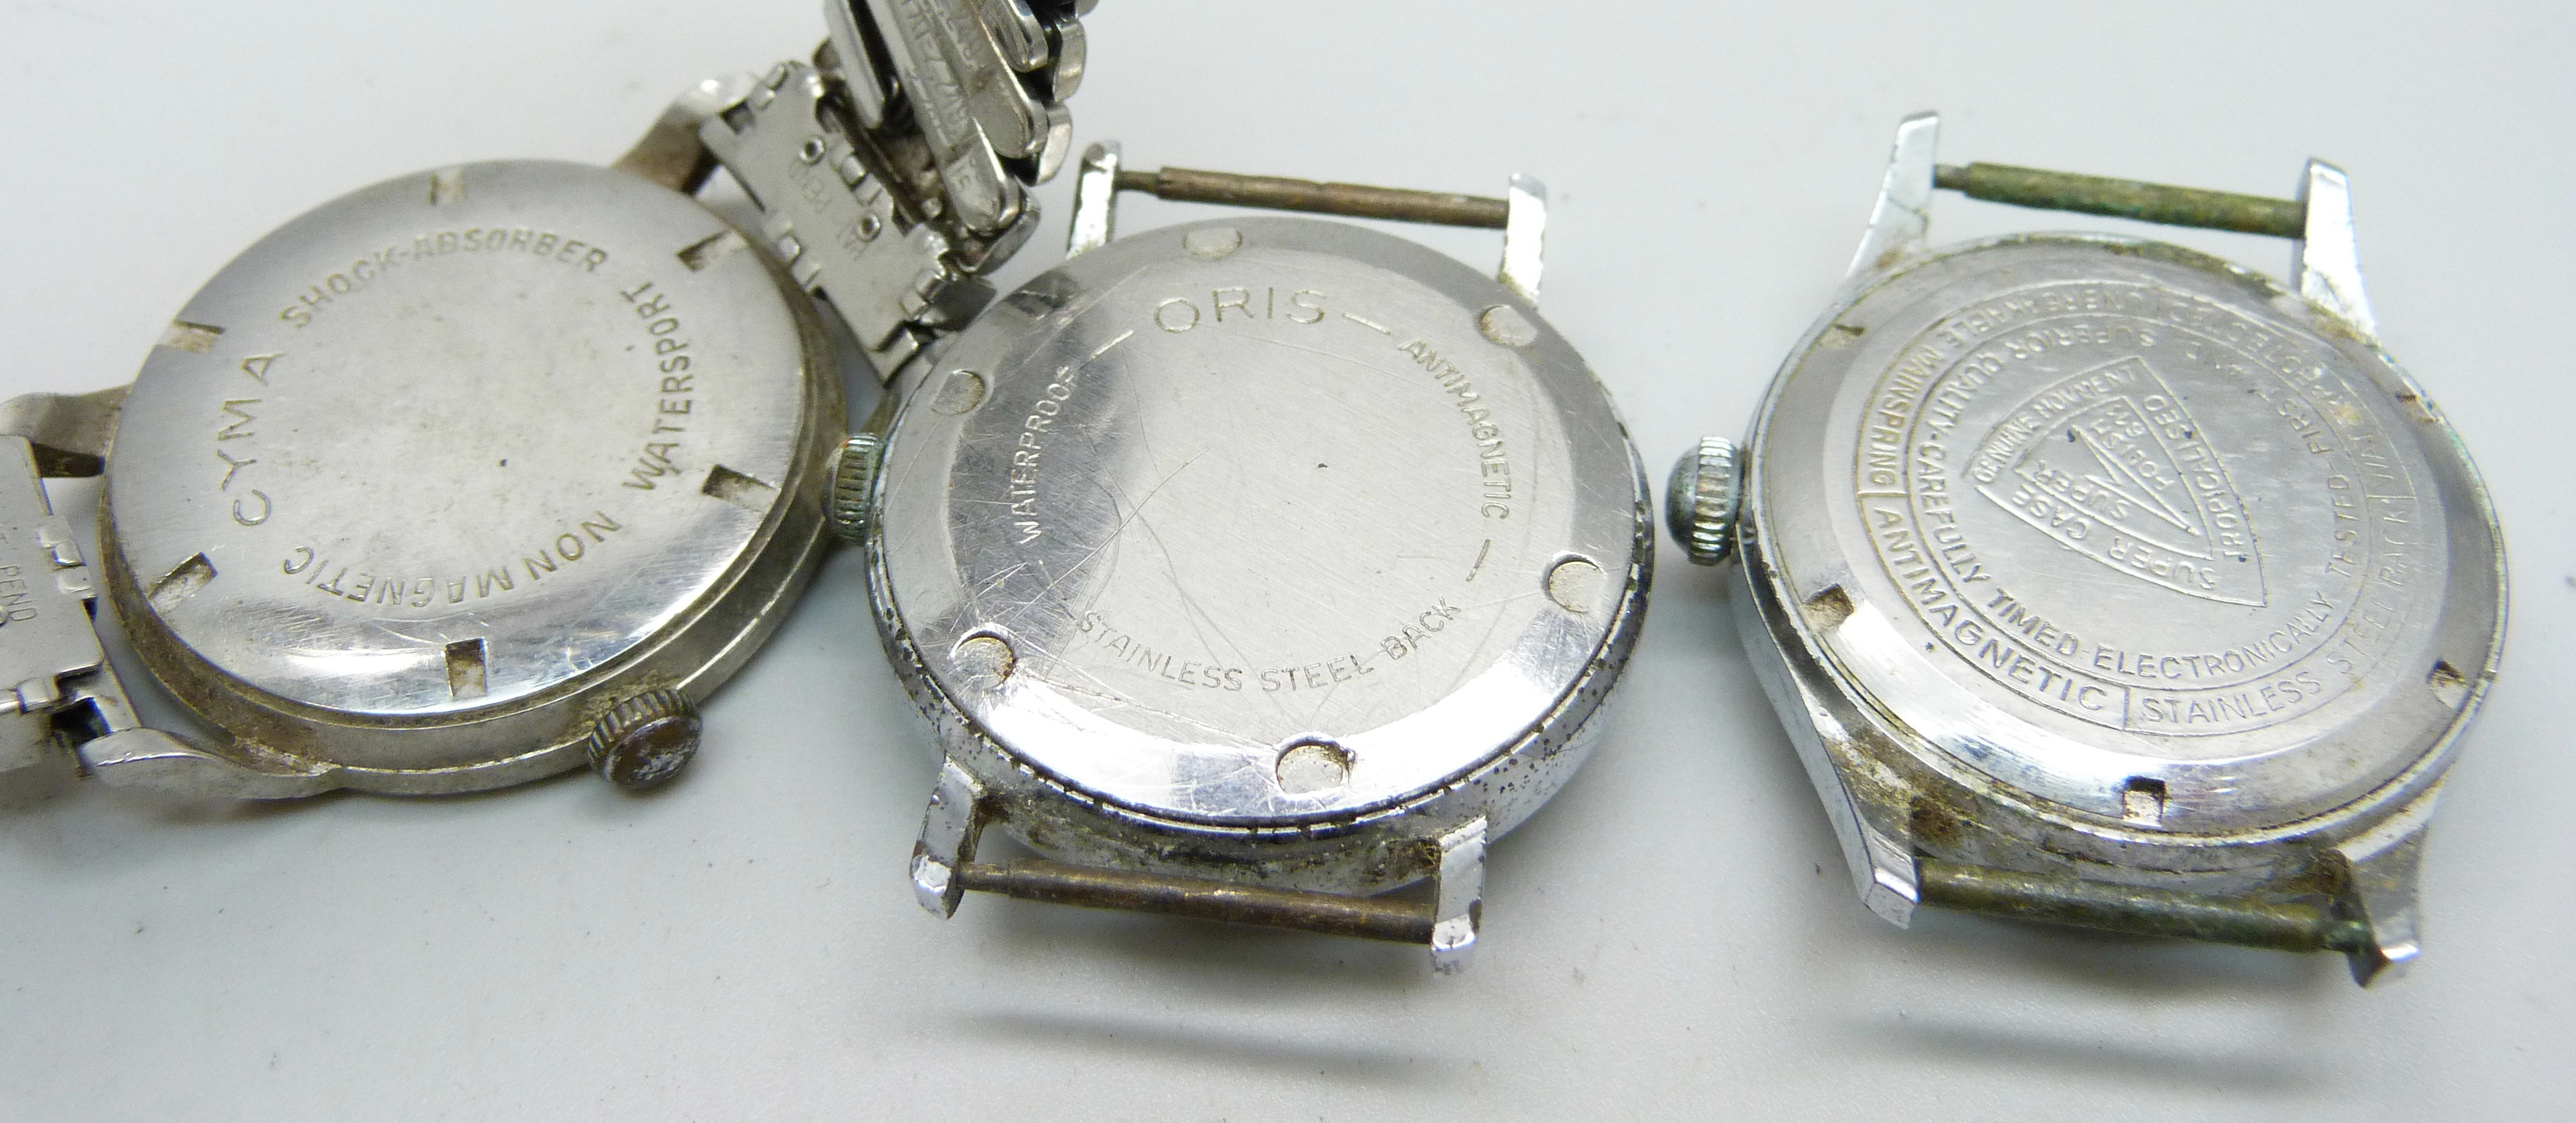 Three gentleman's wristwatches, Oris, Cyma Watersport and one marked Lottery - Image 3 of 3